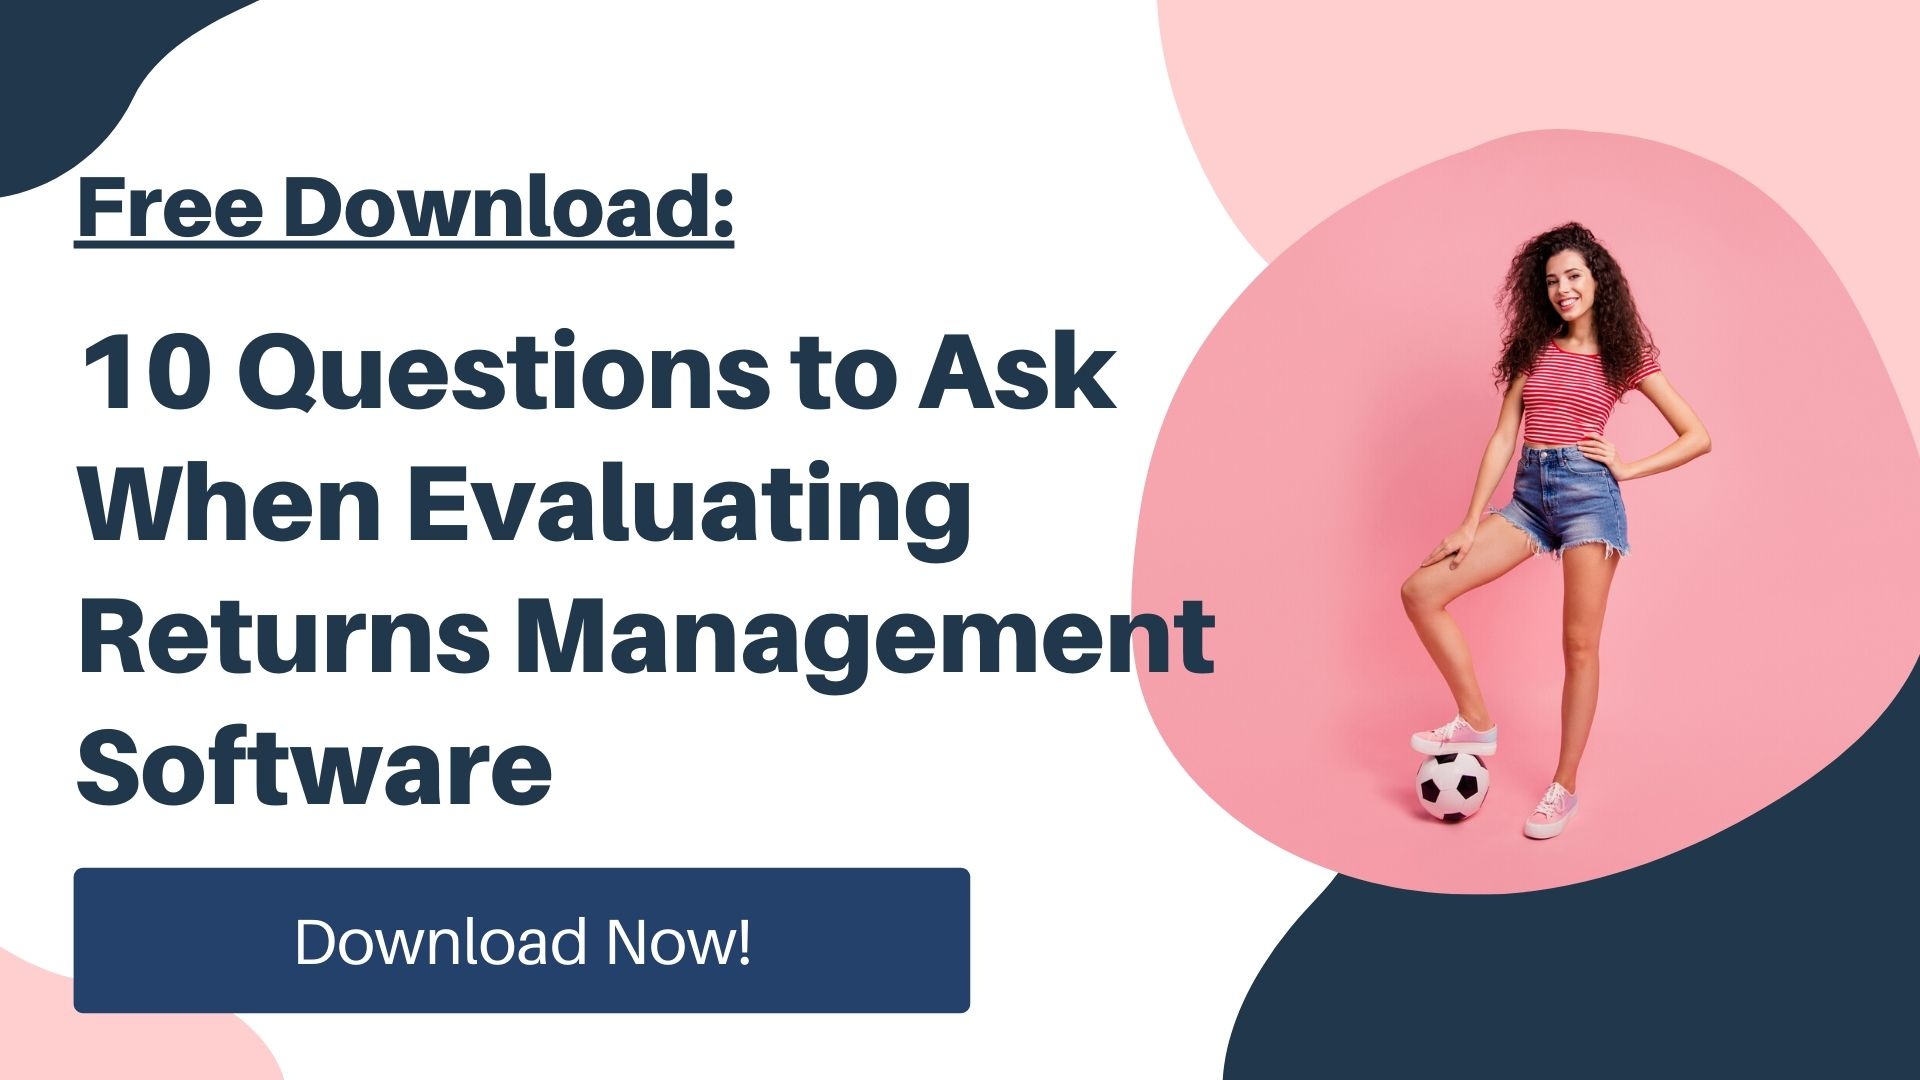 10 Questions to Ask When Evaluating Returns Management Software